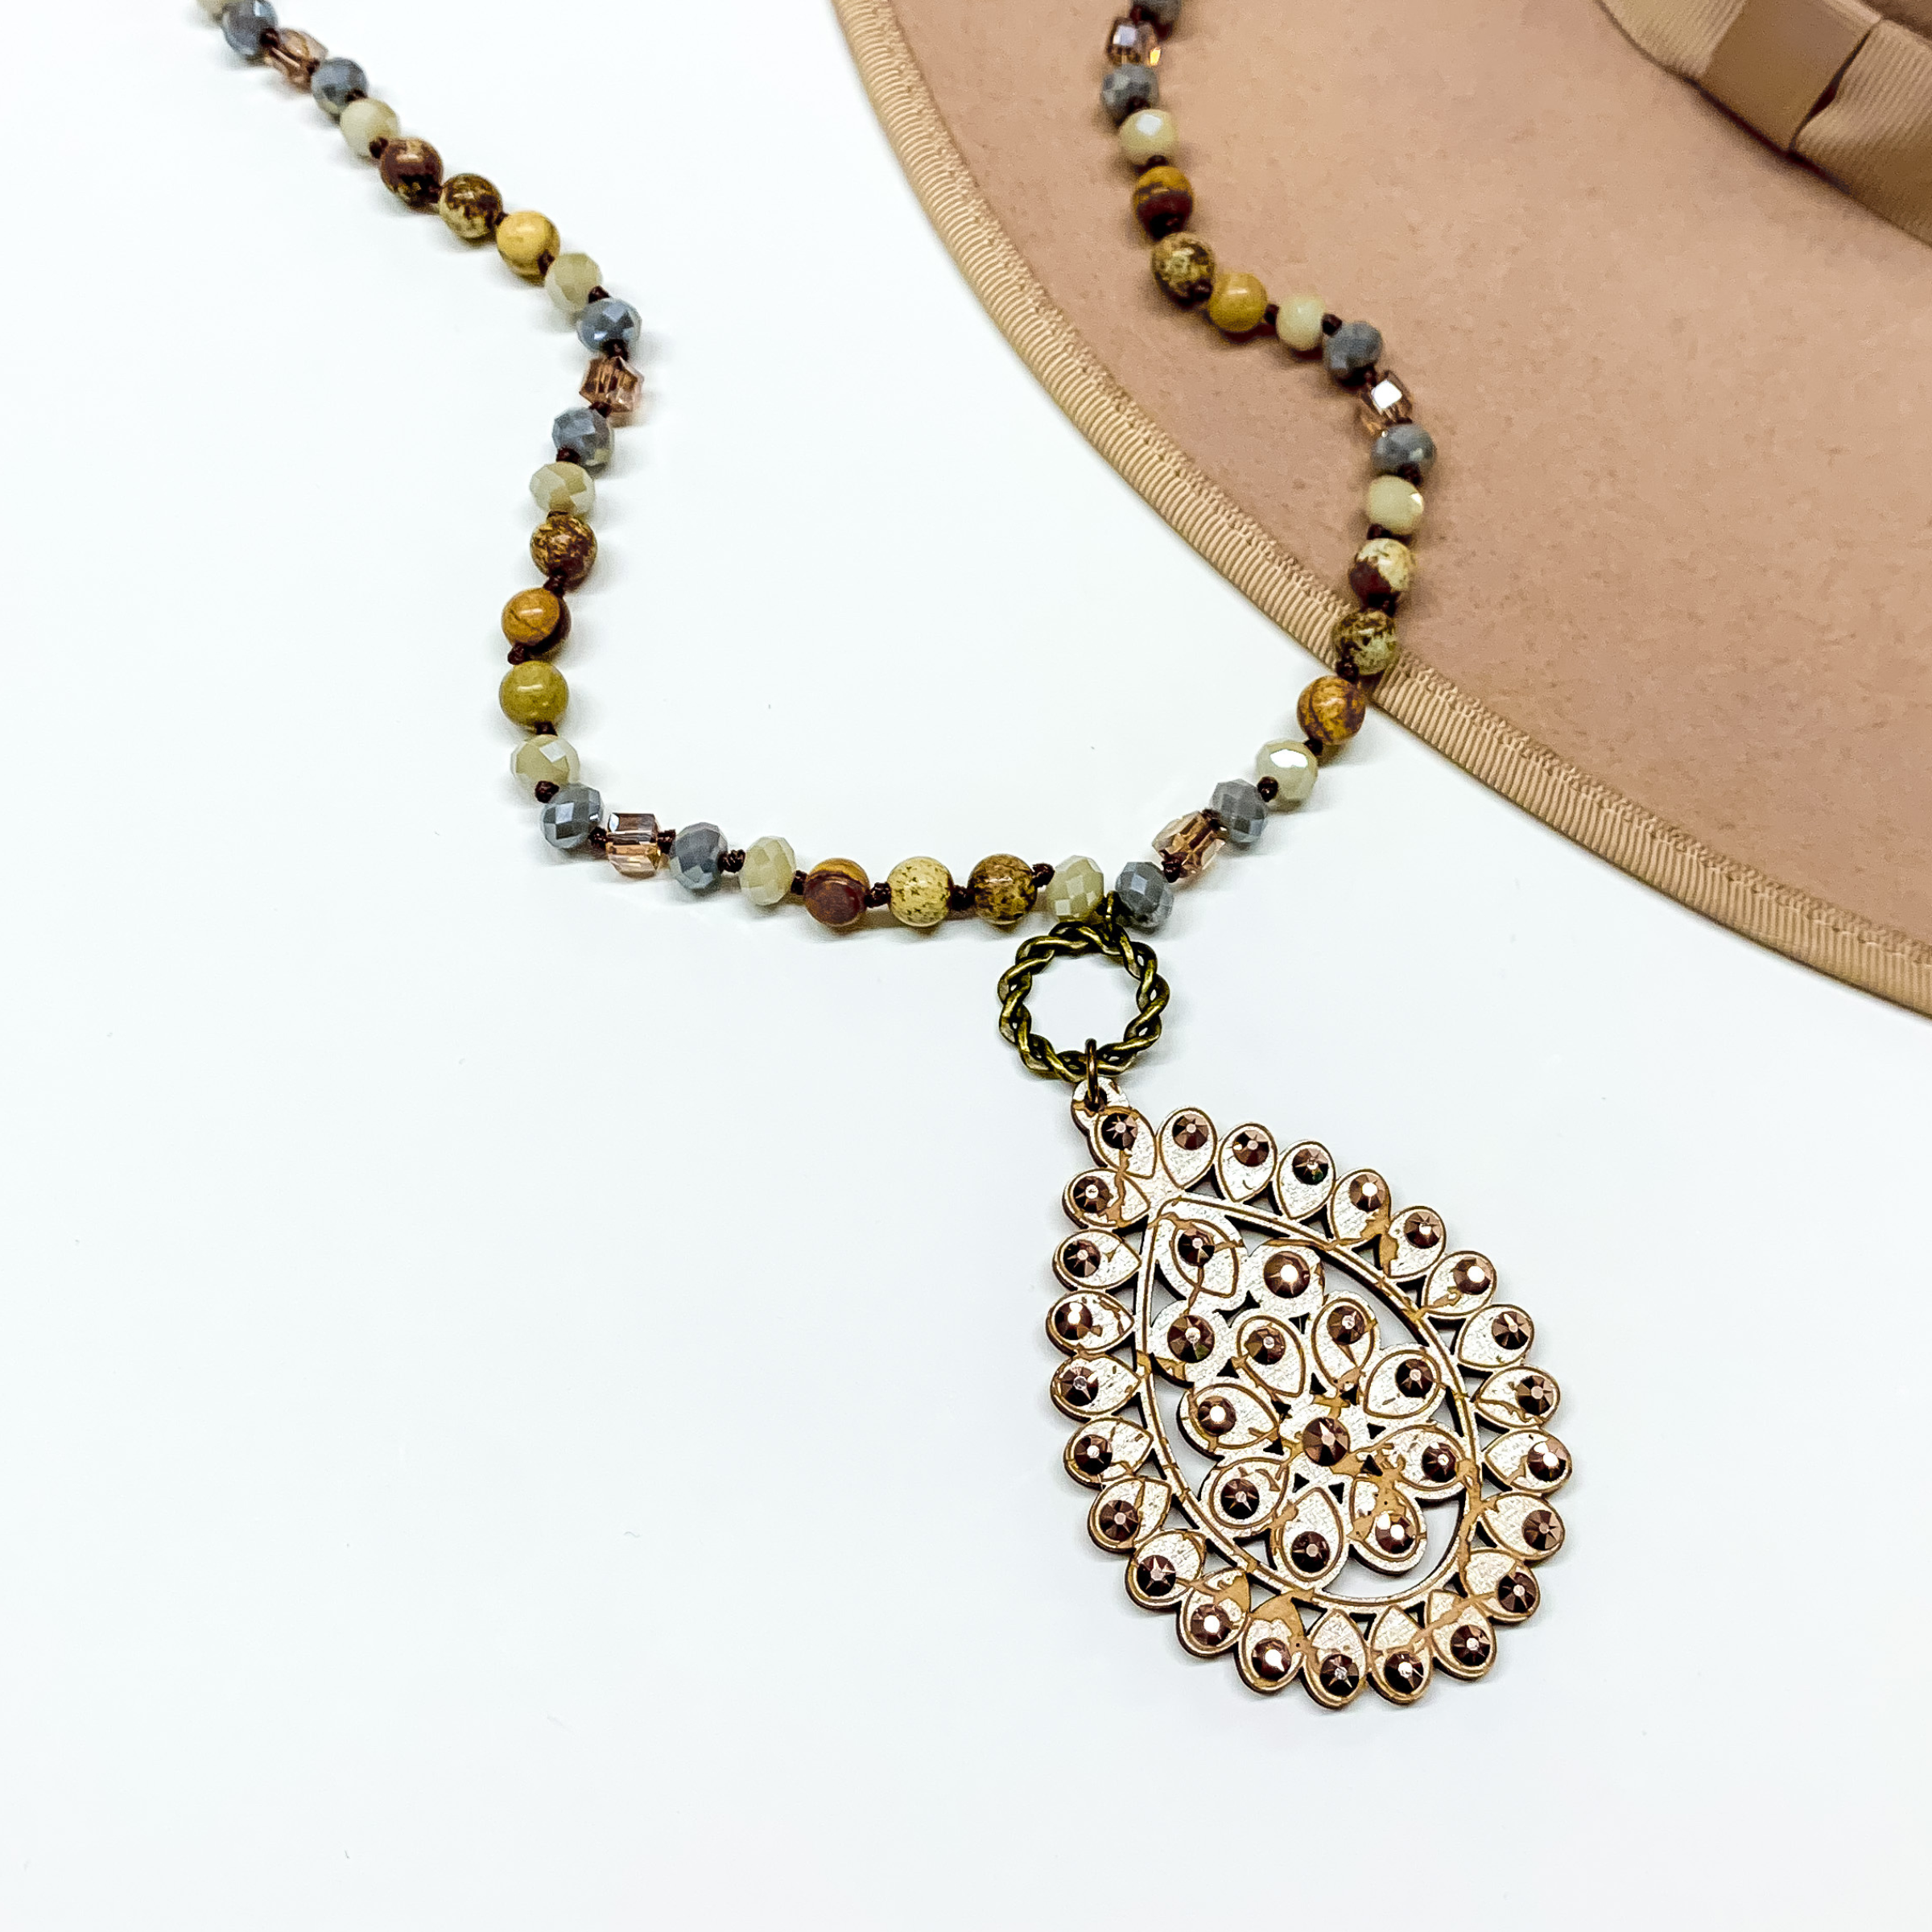 Brown mix beaded necklace with a tan teardrop pendant connected to the necklace by a bronze circle. The pendant has a rose gold crystal outline. This necklace is pictured on a white background with a tan hat brim in the top right corner. 